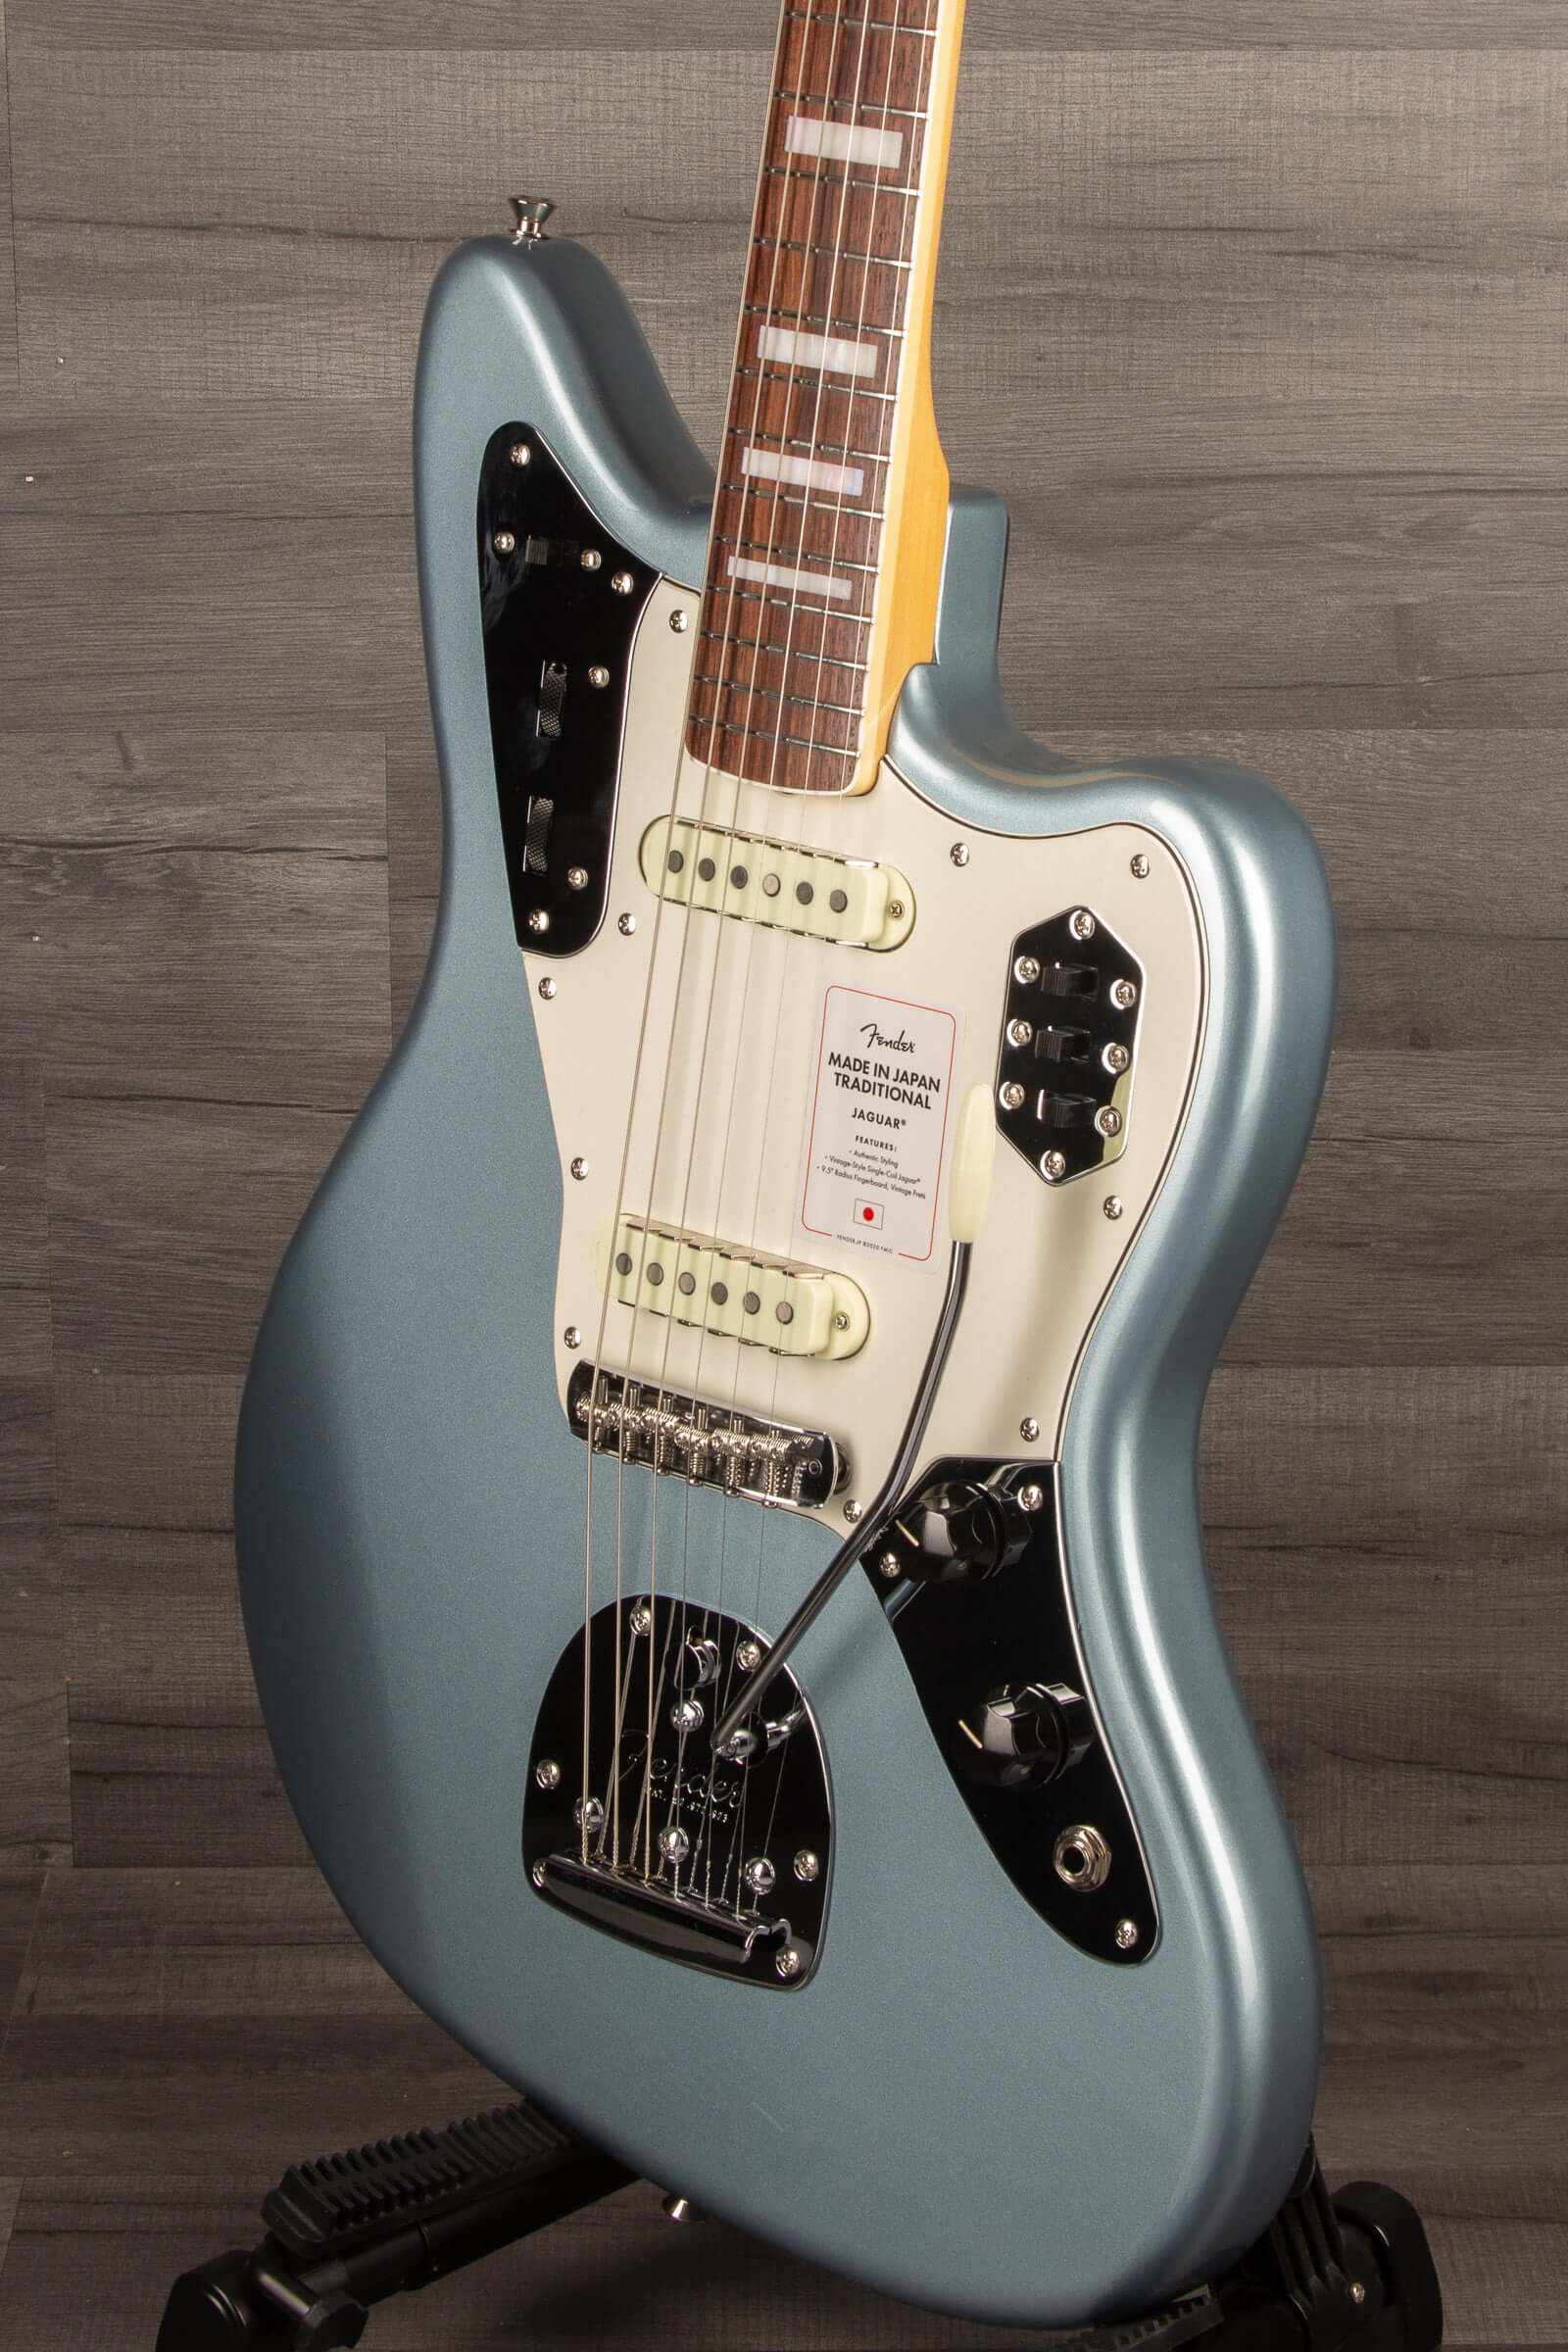 Fender - Traditional Late 60s Jaguar®  Ice Blue Metallic - Made in Japan